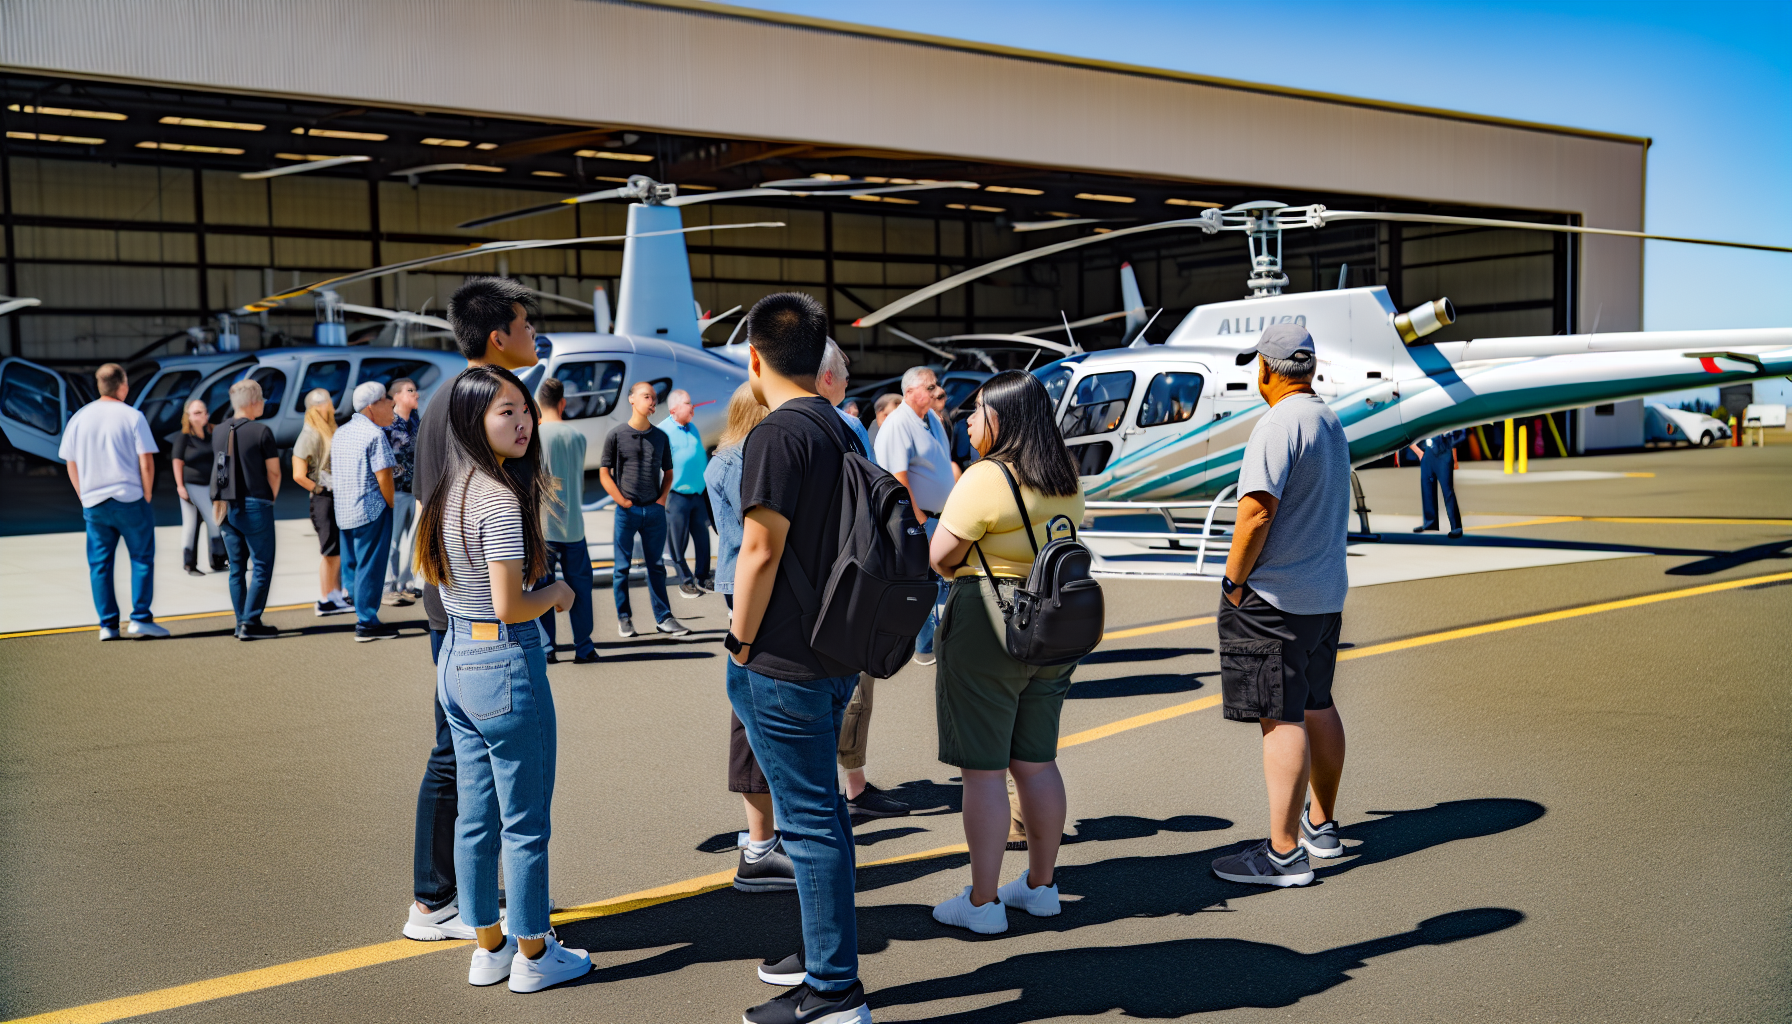 Prospective students visiting a helicopter flight school